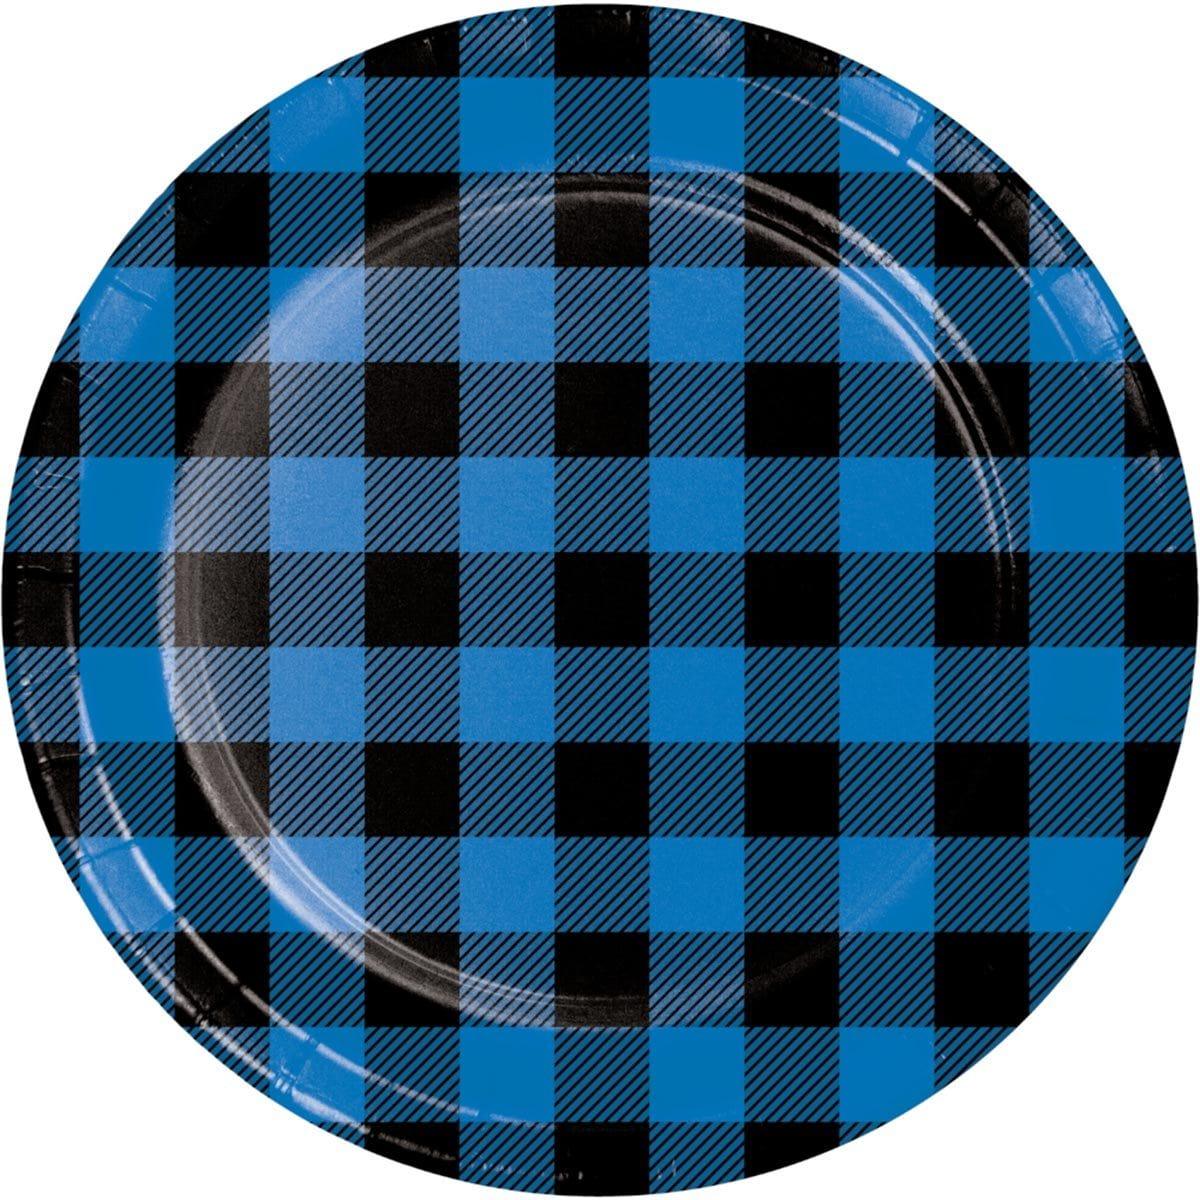 Buy Everyday Entertaining Blue Buffalo Plaid Plates, 9 inches, 8 Count sold at Party Expert